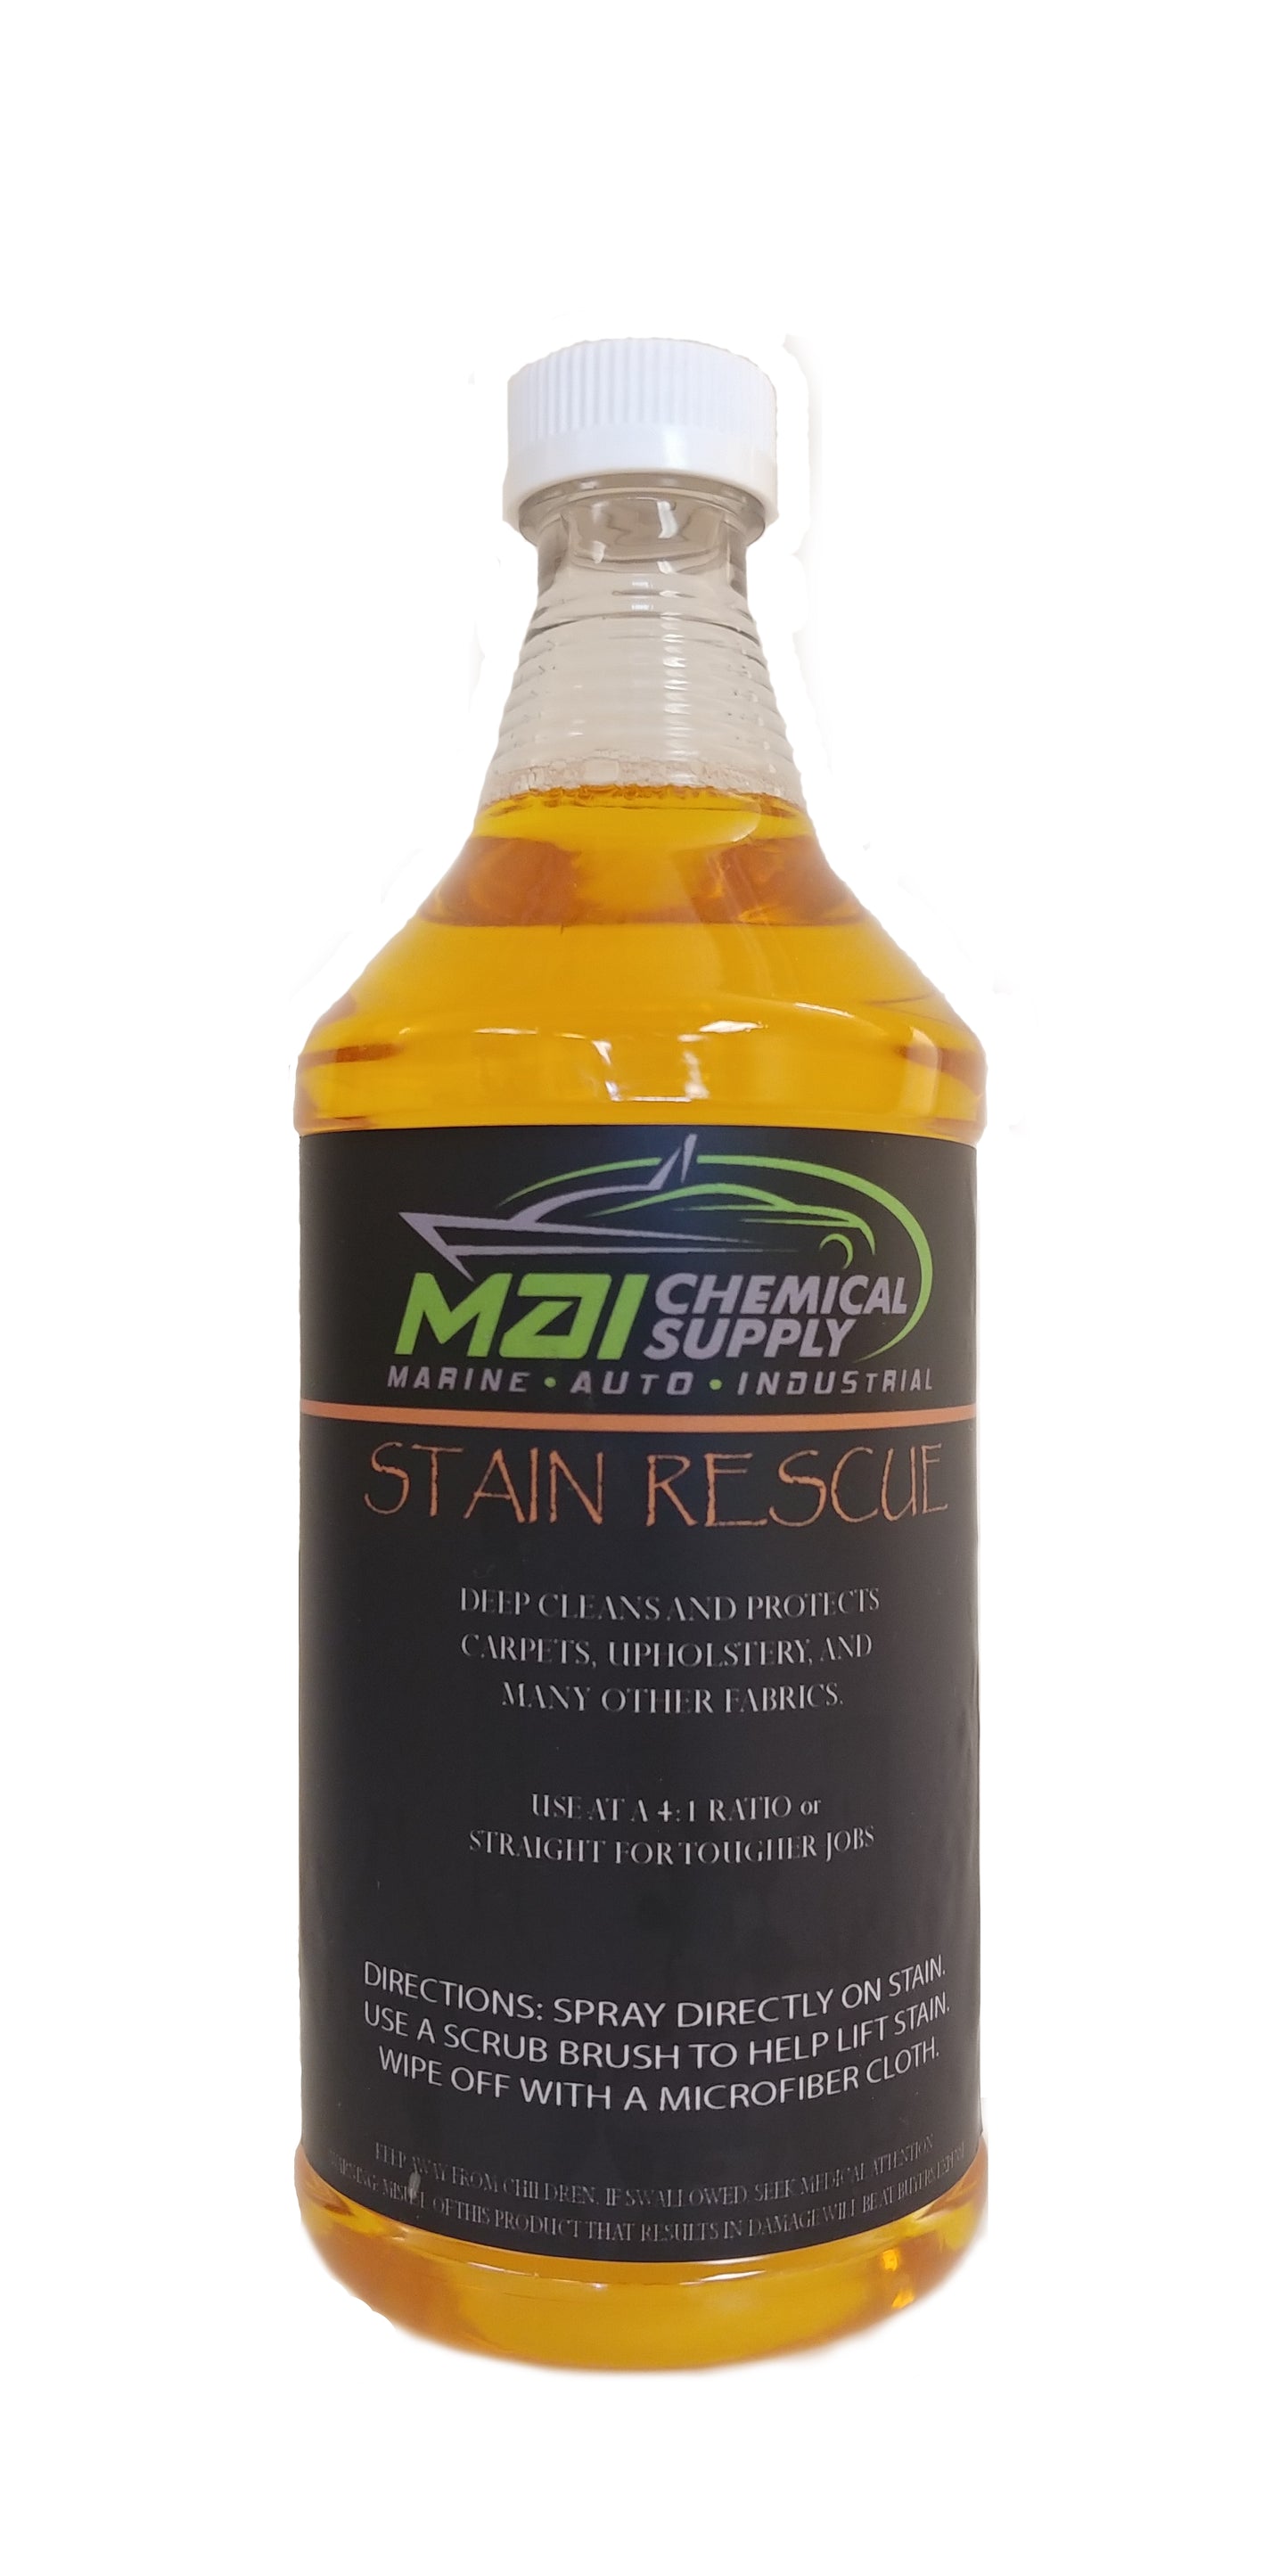 Stain Rescue (Interior Cleaner)